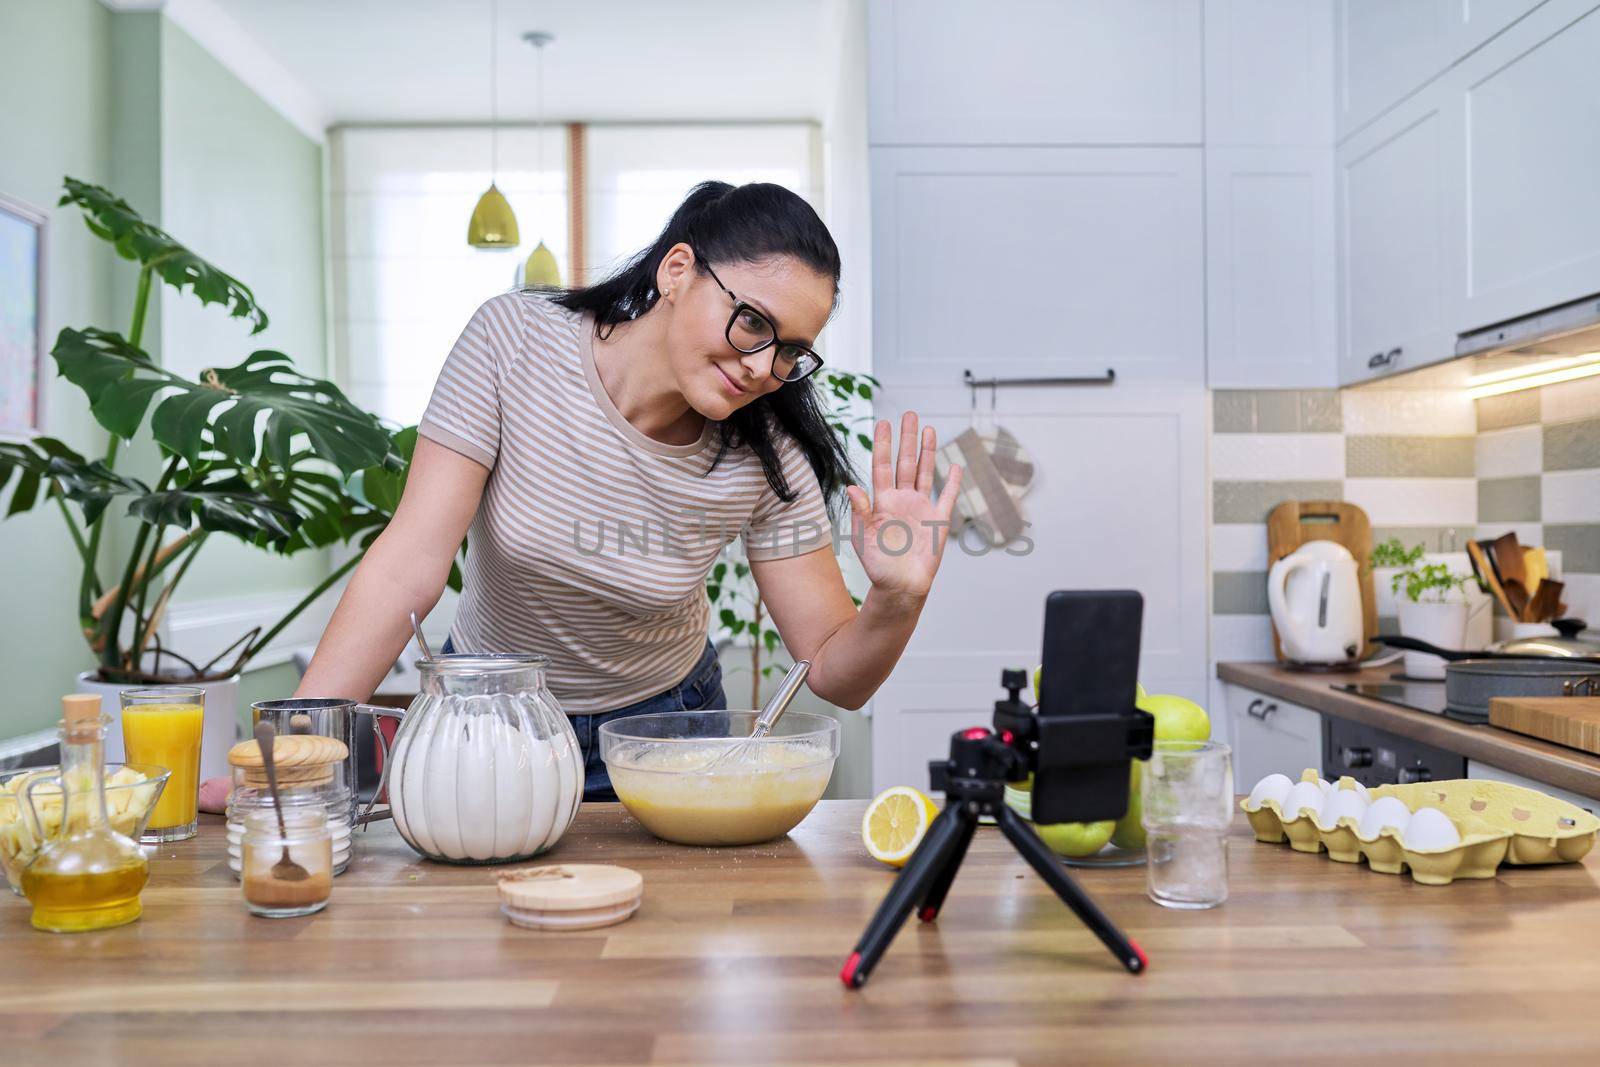 Technologies in everyday life, 40s woman preparing apple pie at home in kitchen, with smartphone on tripod using video call for communication. Lifestyle, eating at home, technology, people concept